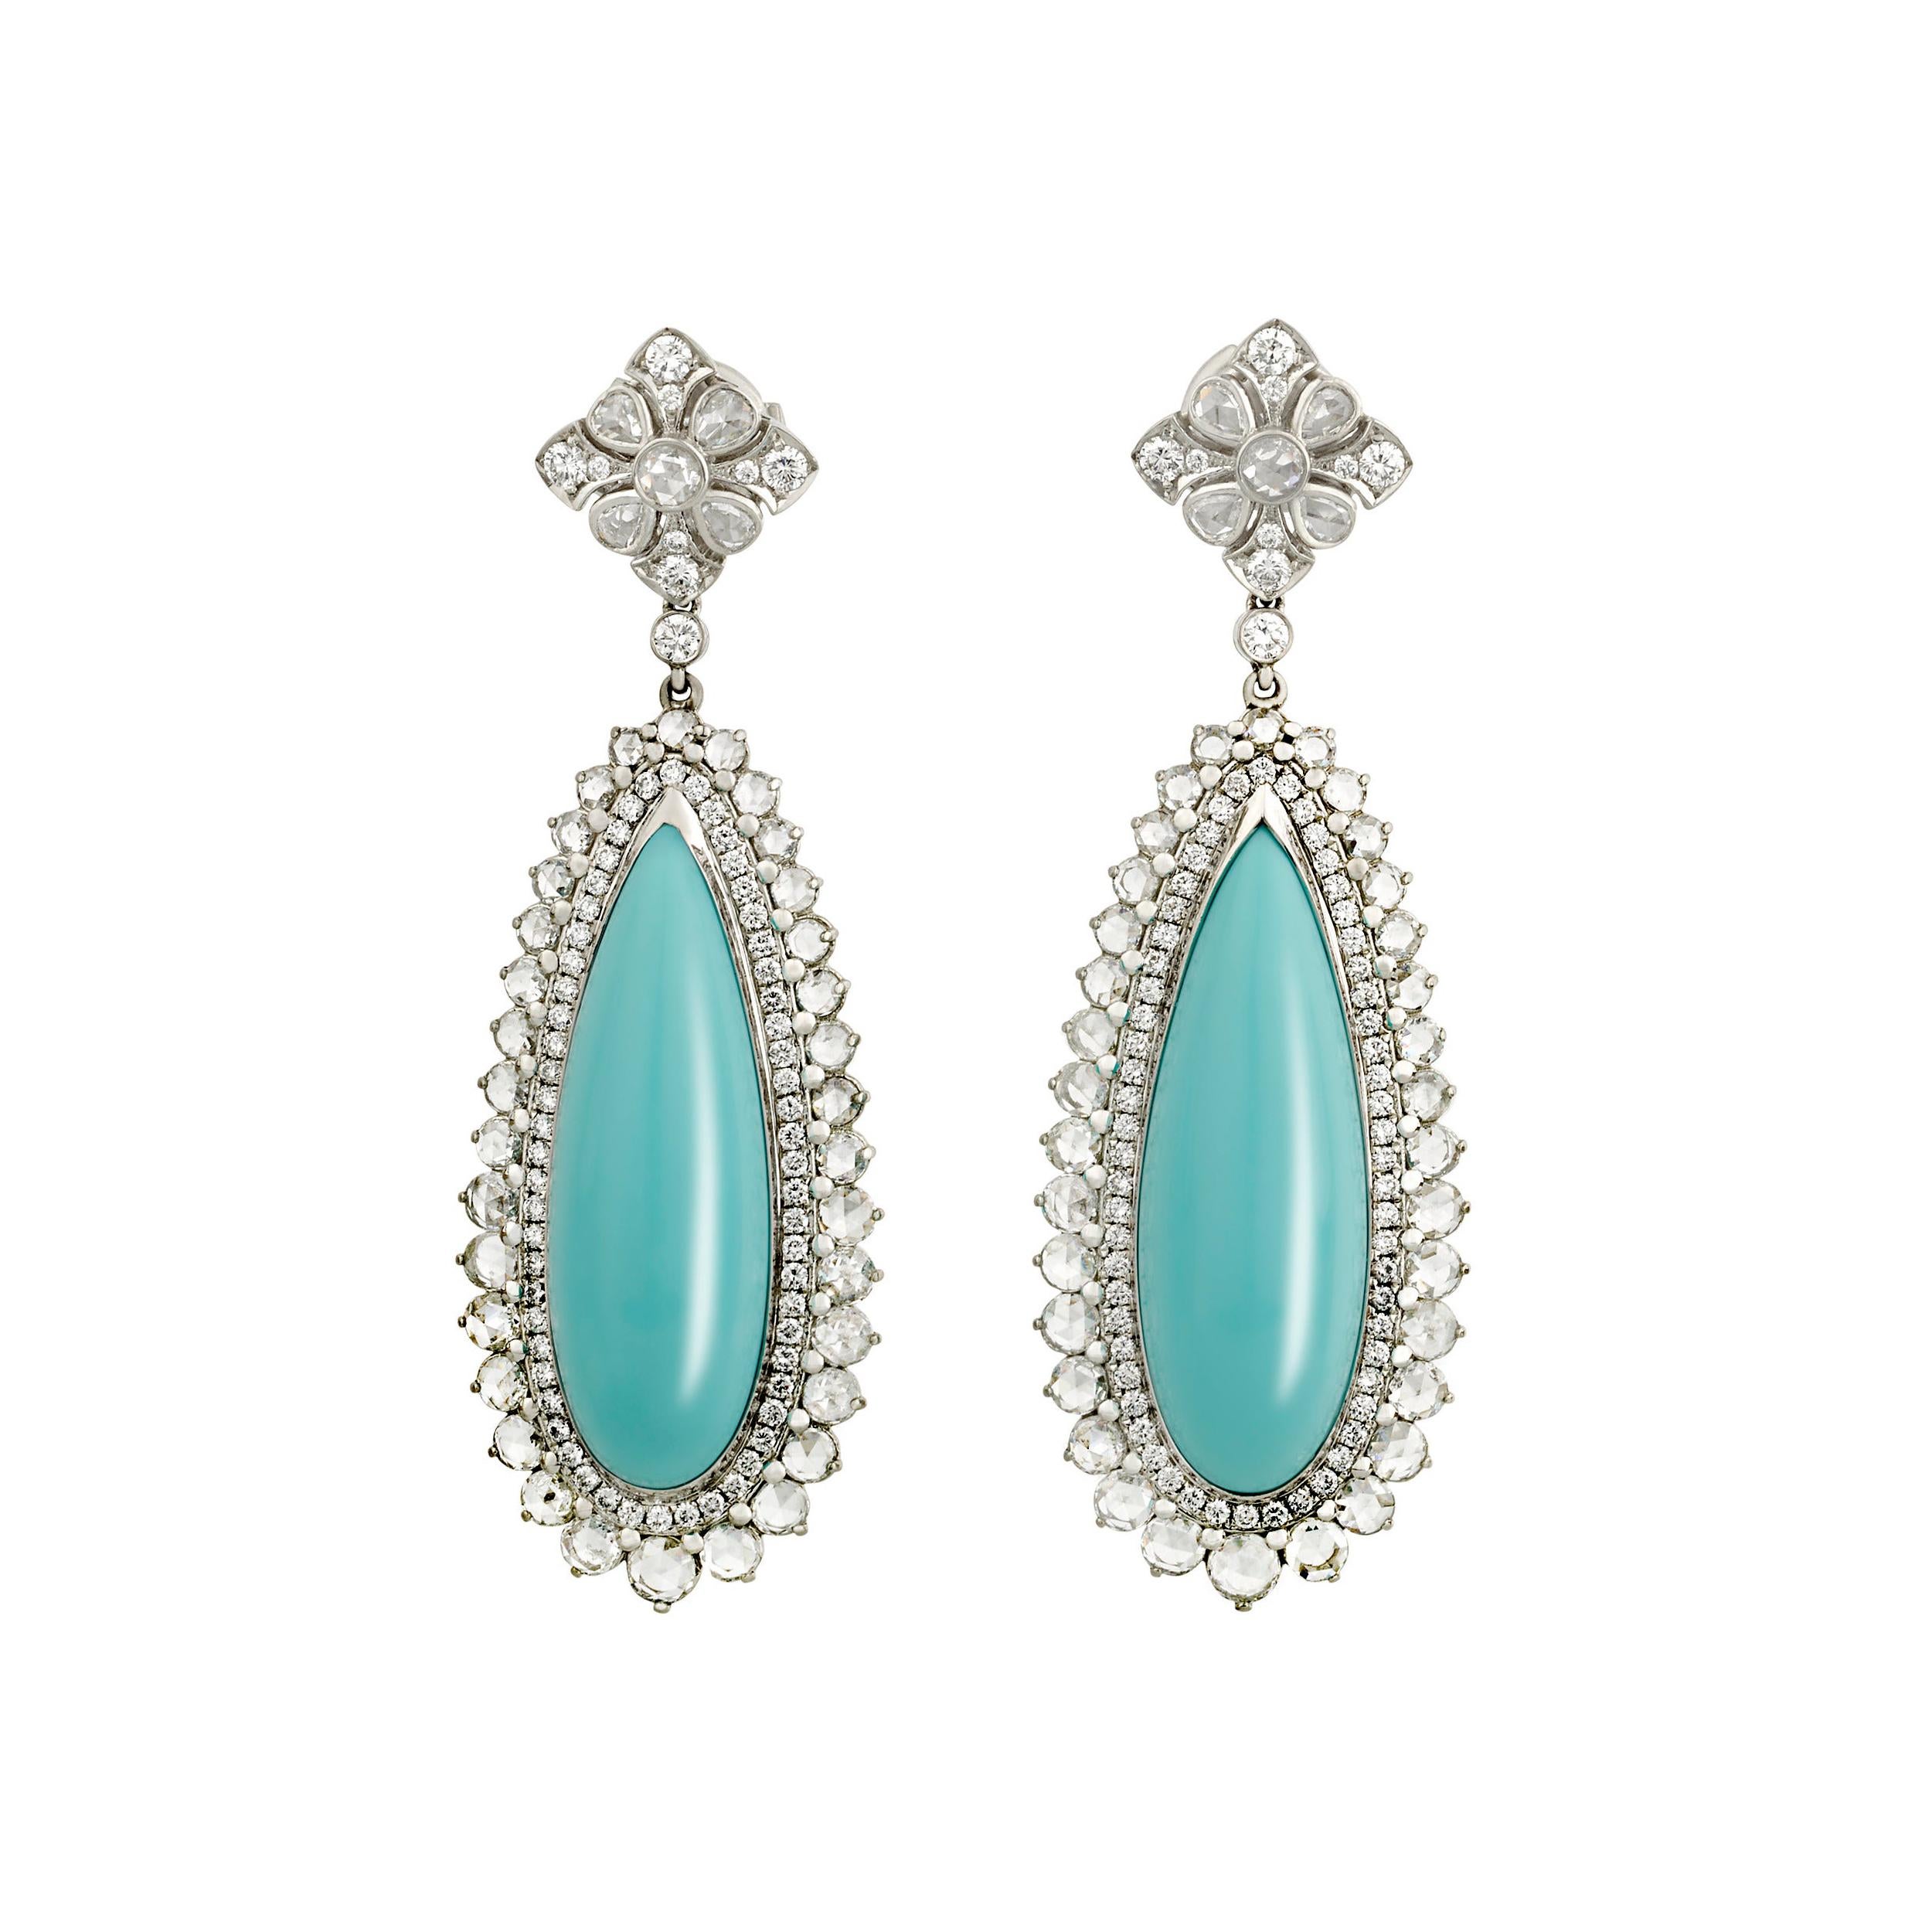 Turquoise and Diamond Earrings by Tiffany & Co.